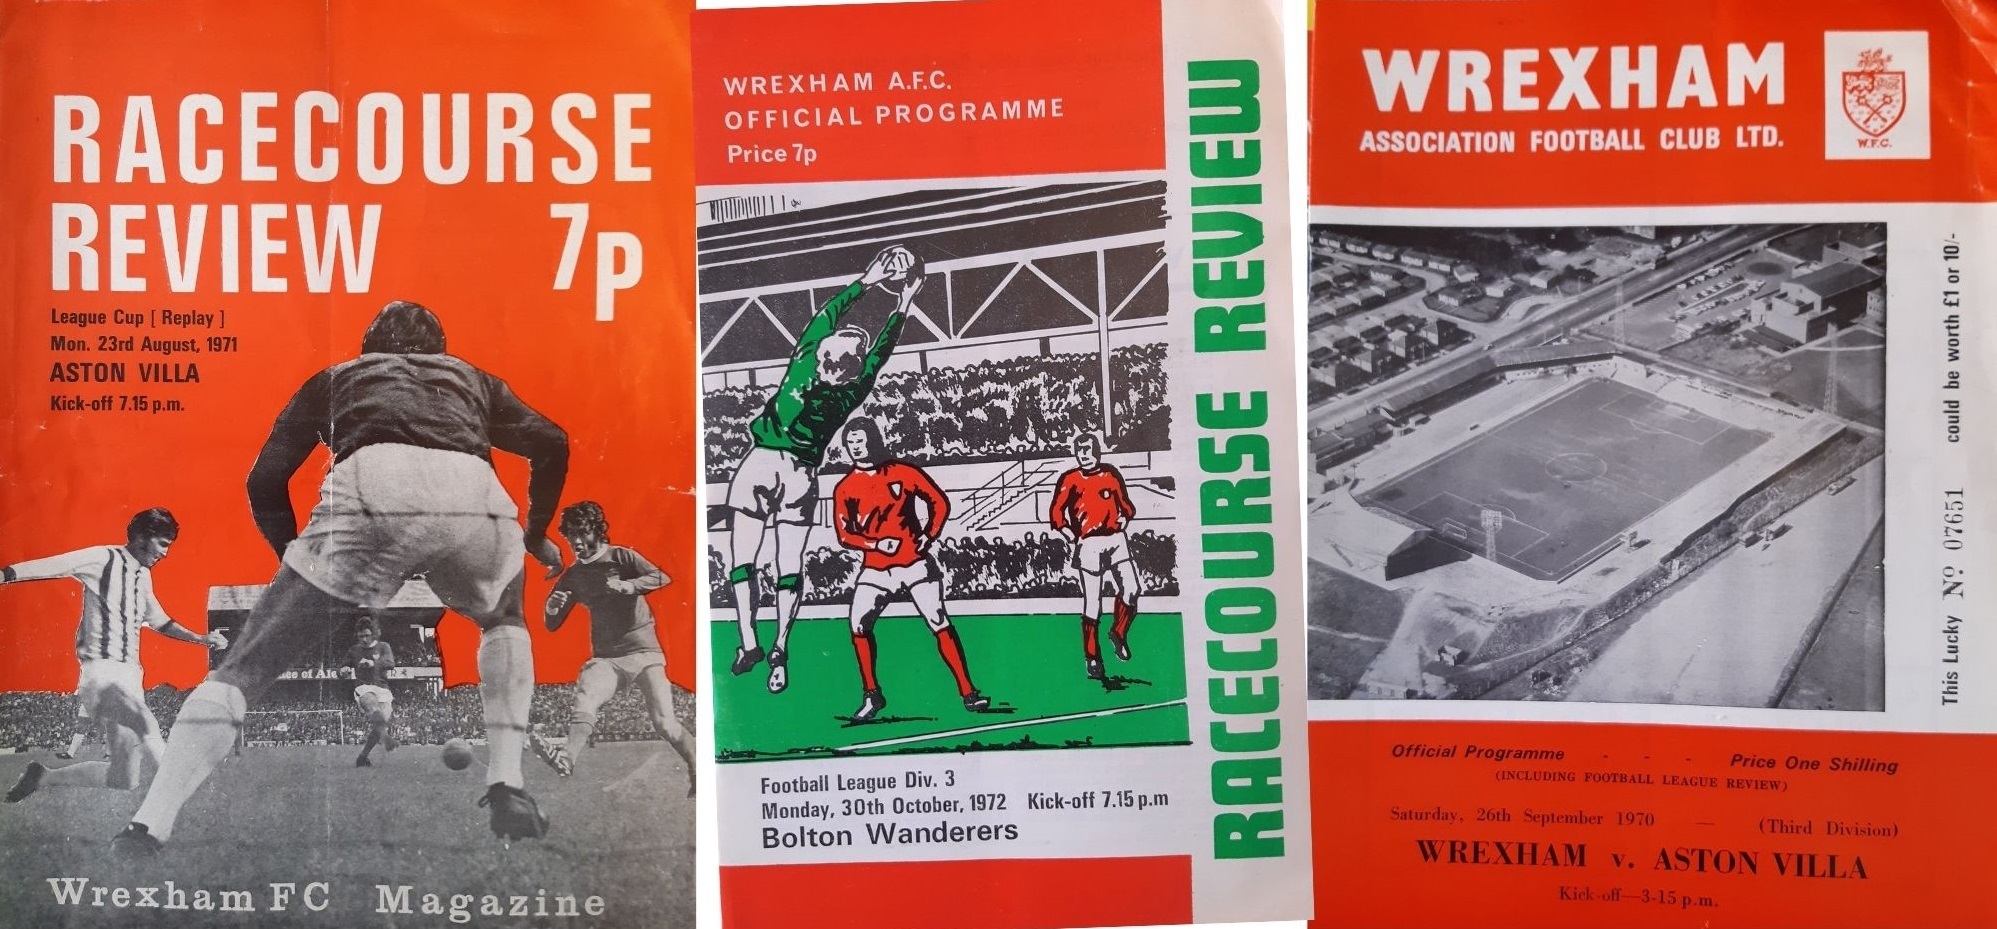 Some of the Wrexham AFC programmes in Glyn Hughes collection.